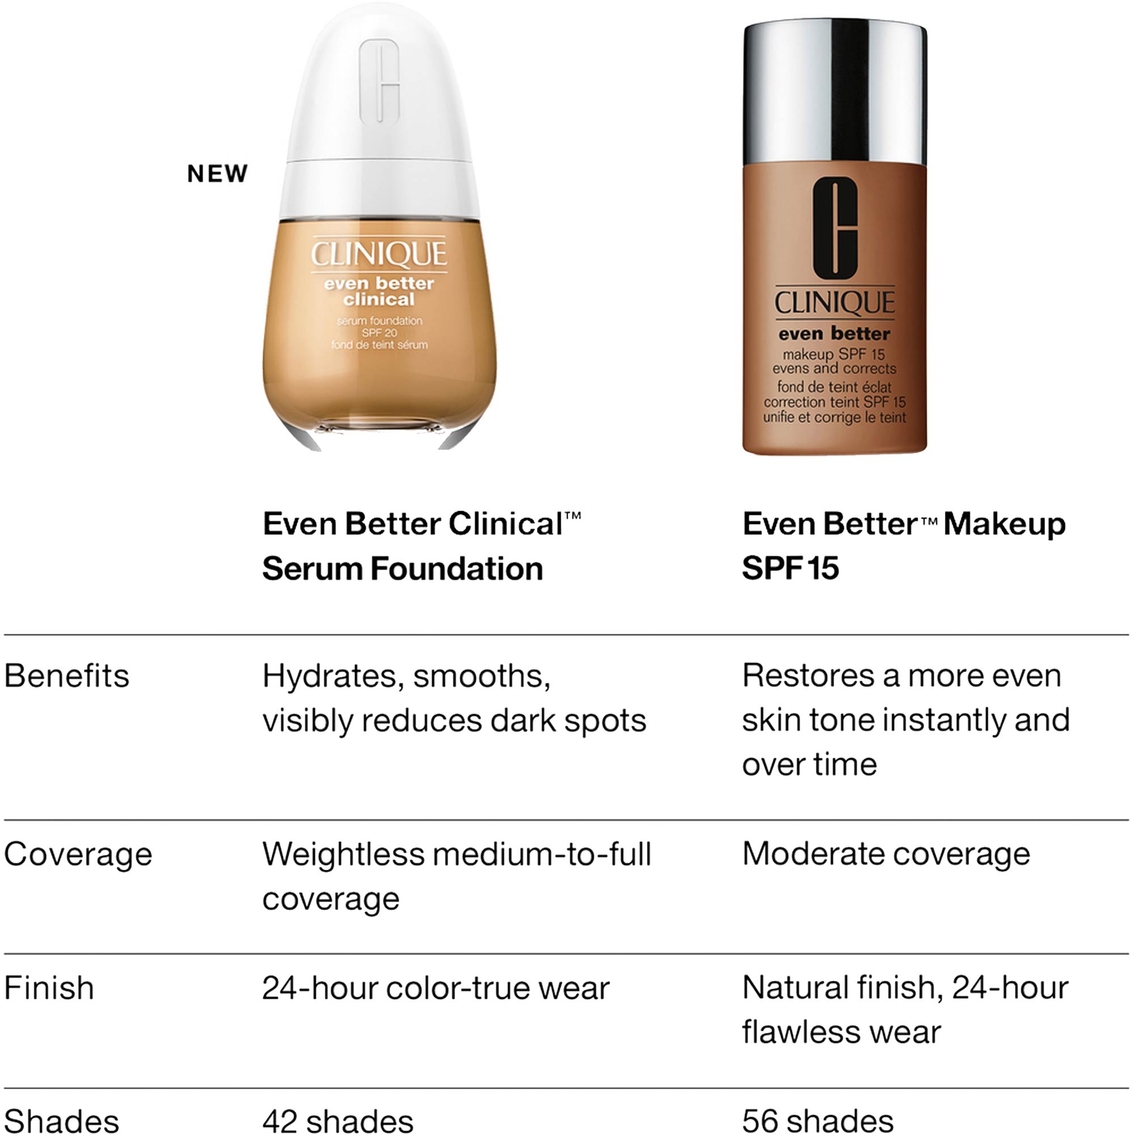 Clinique Even Better Clinical Serum Foundation Broad Spectrum SPF 25 - Image 8 of 10